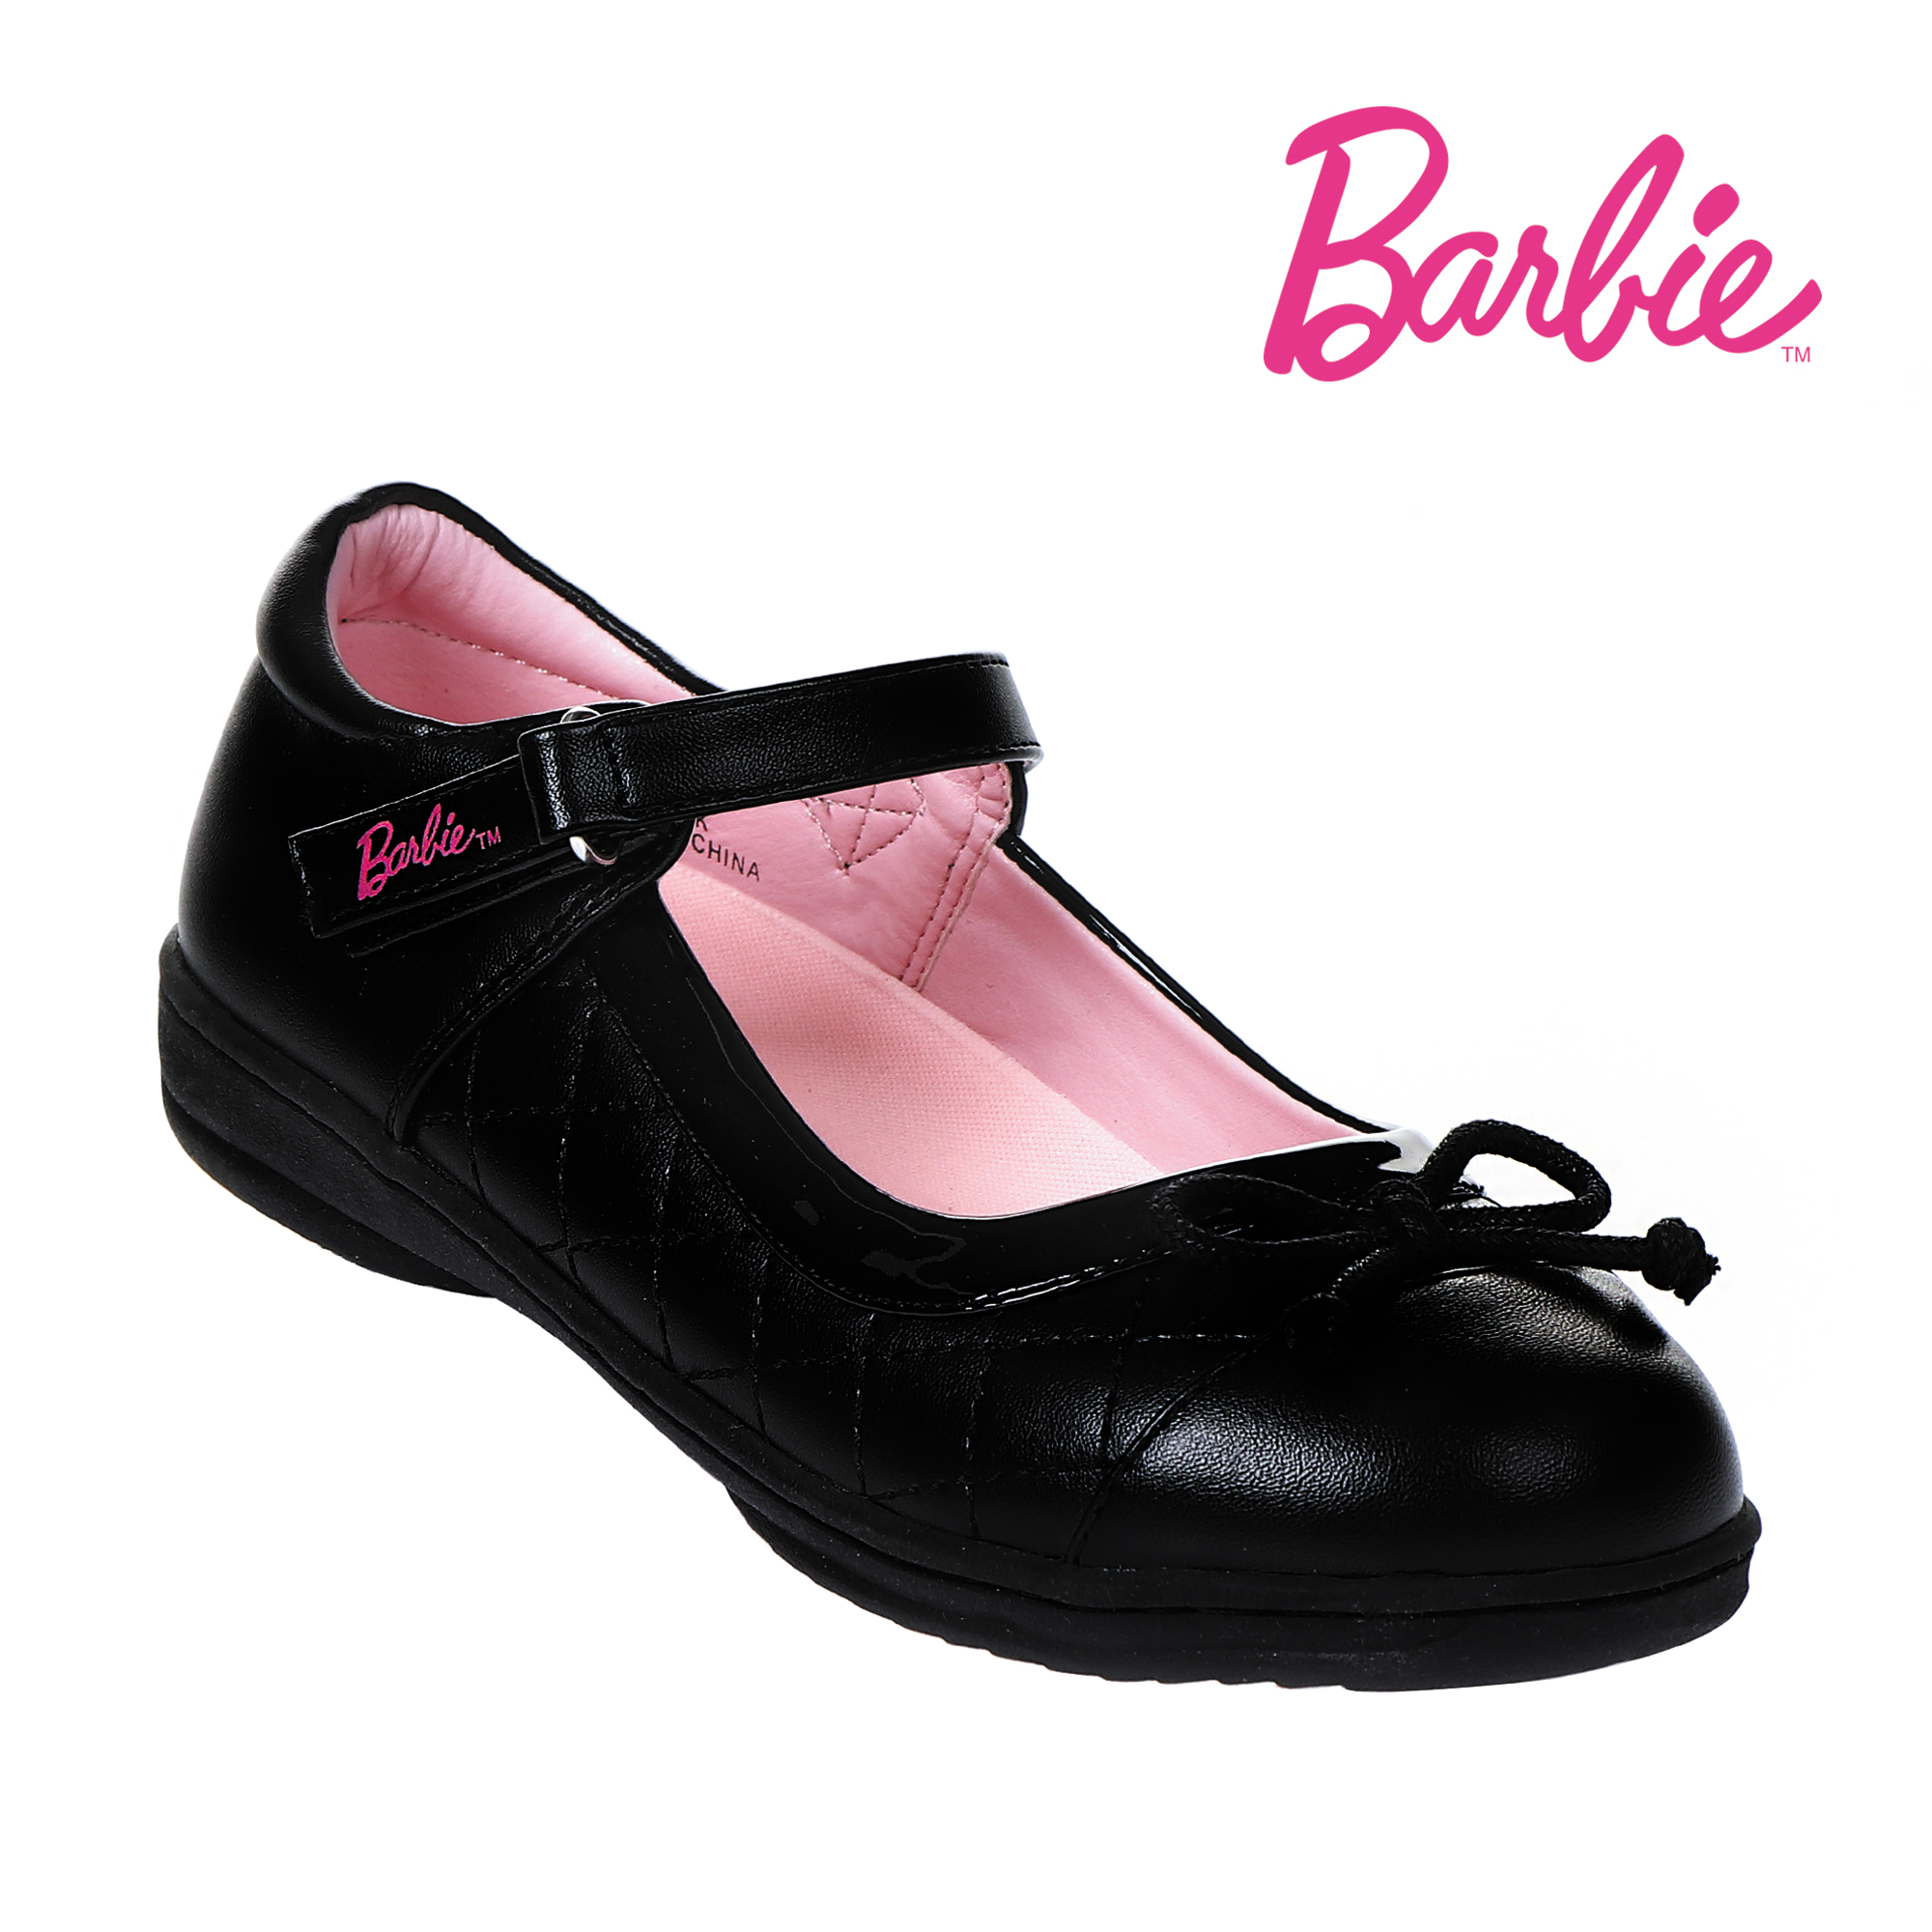 girls school shoes with bow